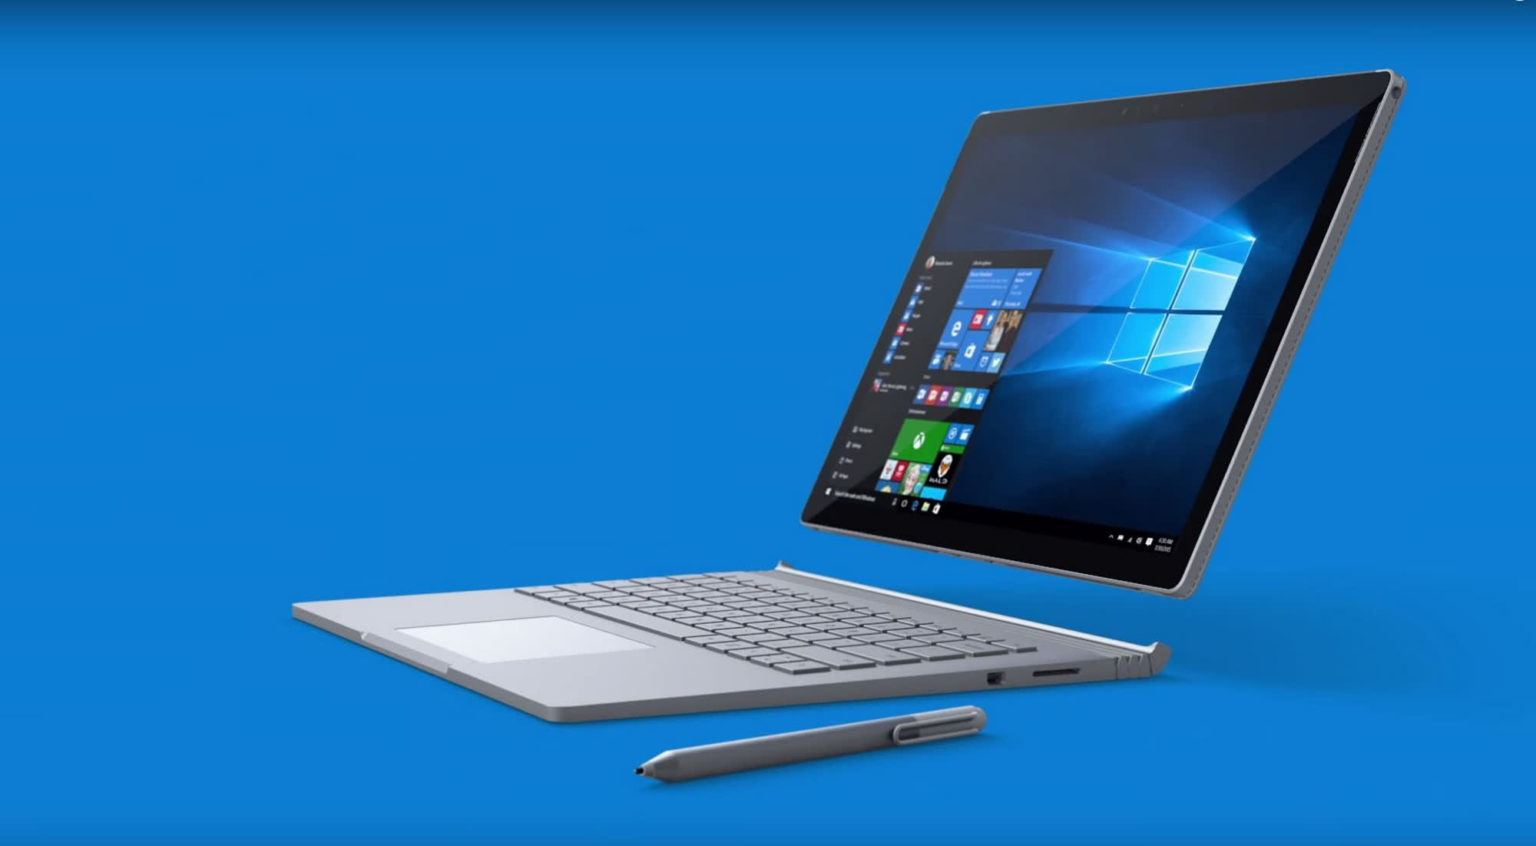 Microsoft releases firmware update for all Surface devices